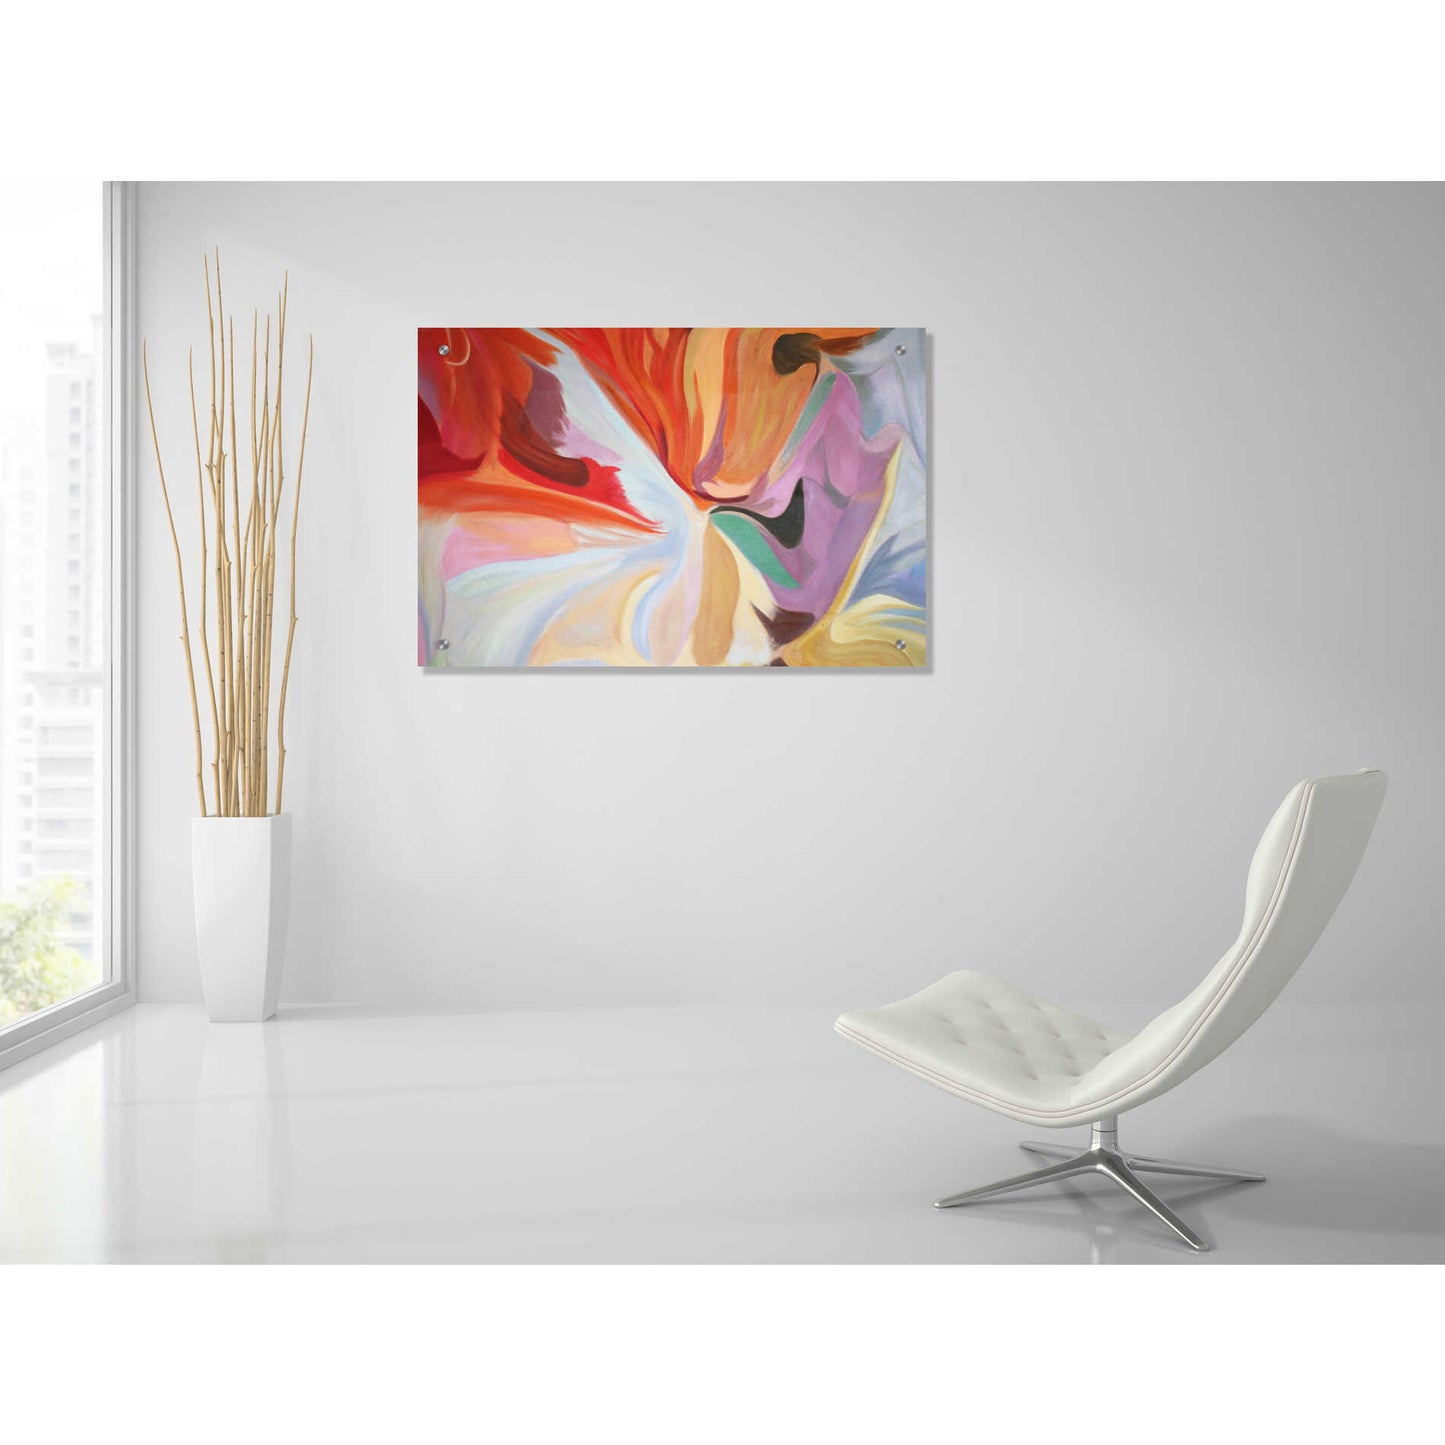 Epic Art 'Notes of Elegance 8' by Irena Orlov, Acrylic Glass Wall Art,36x24